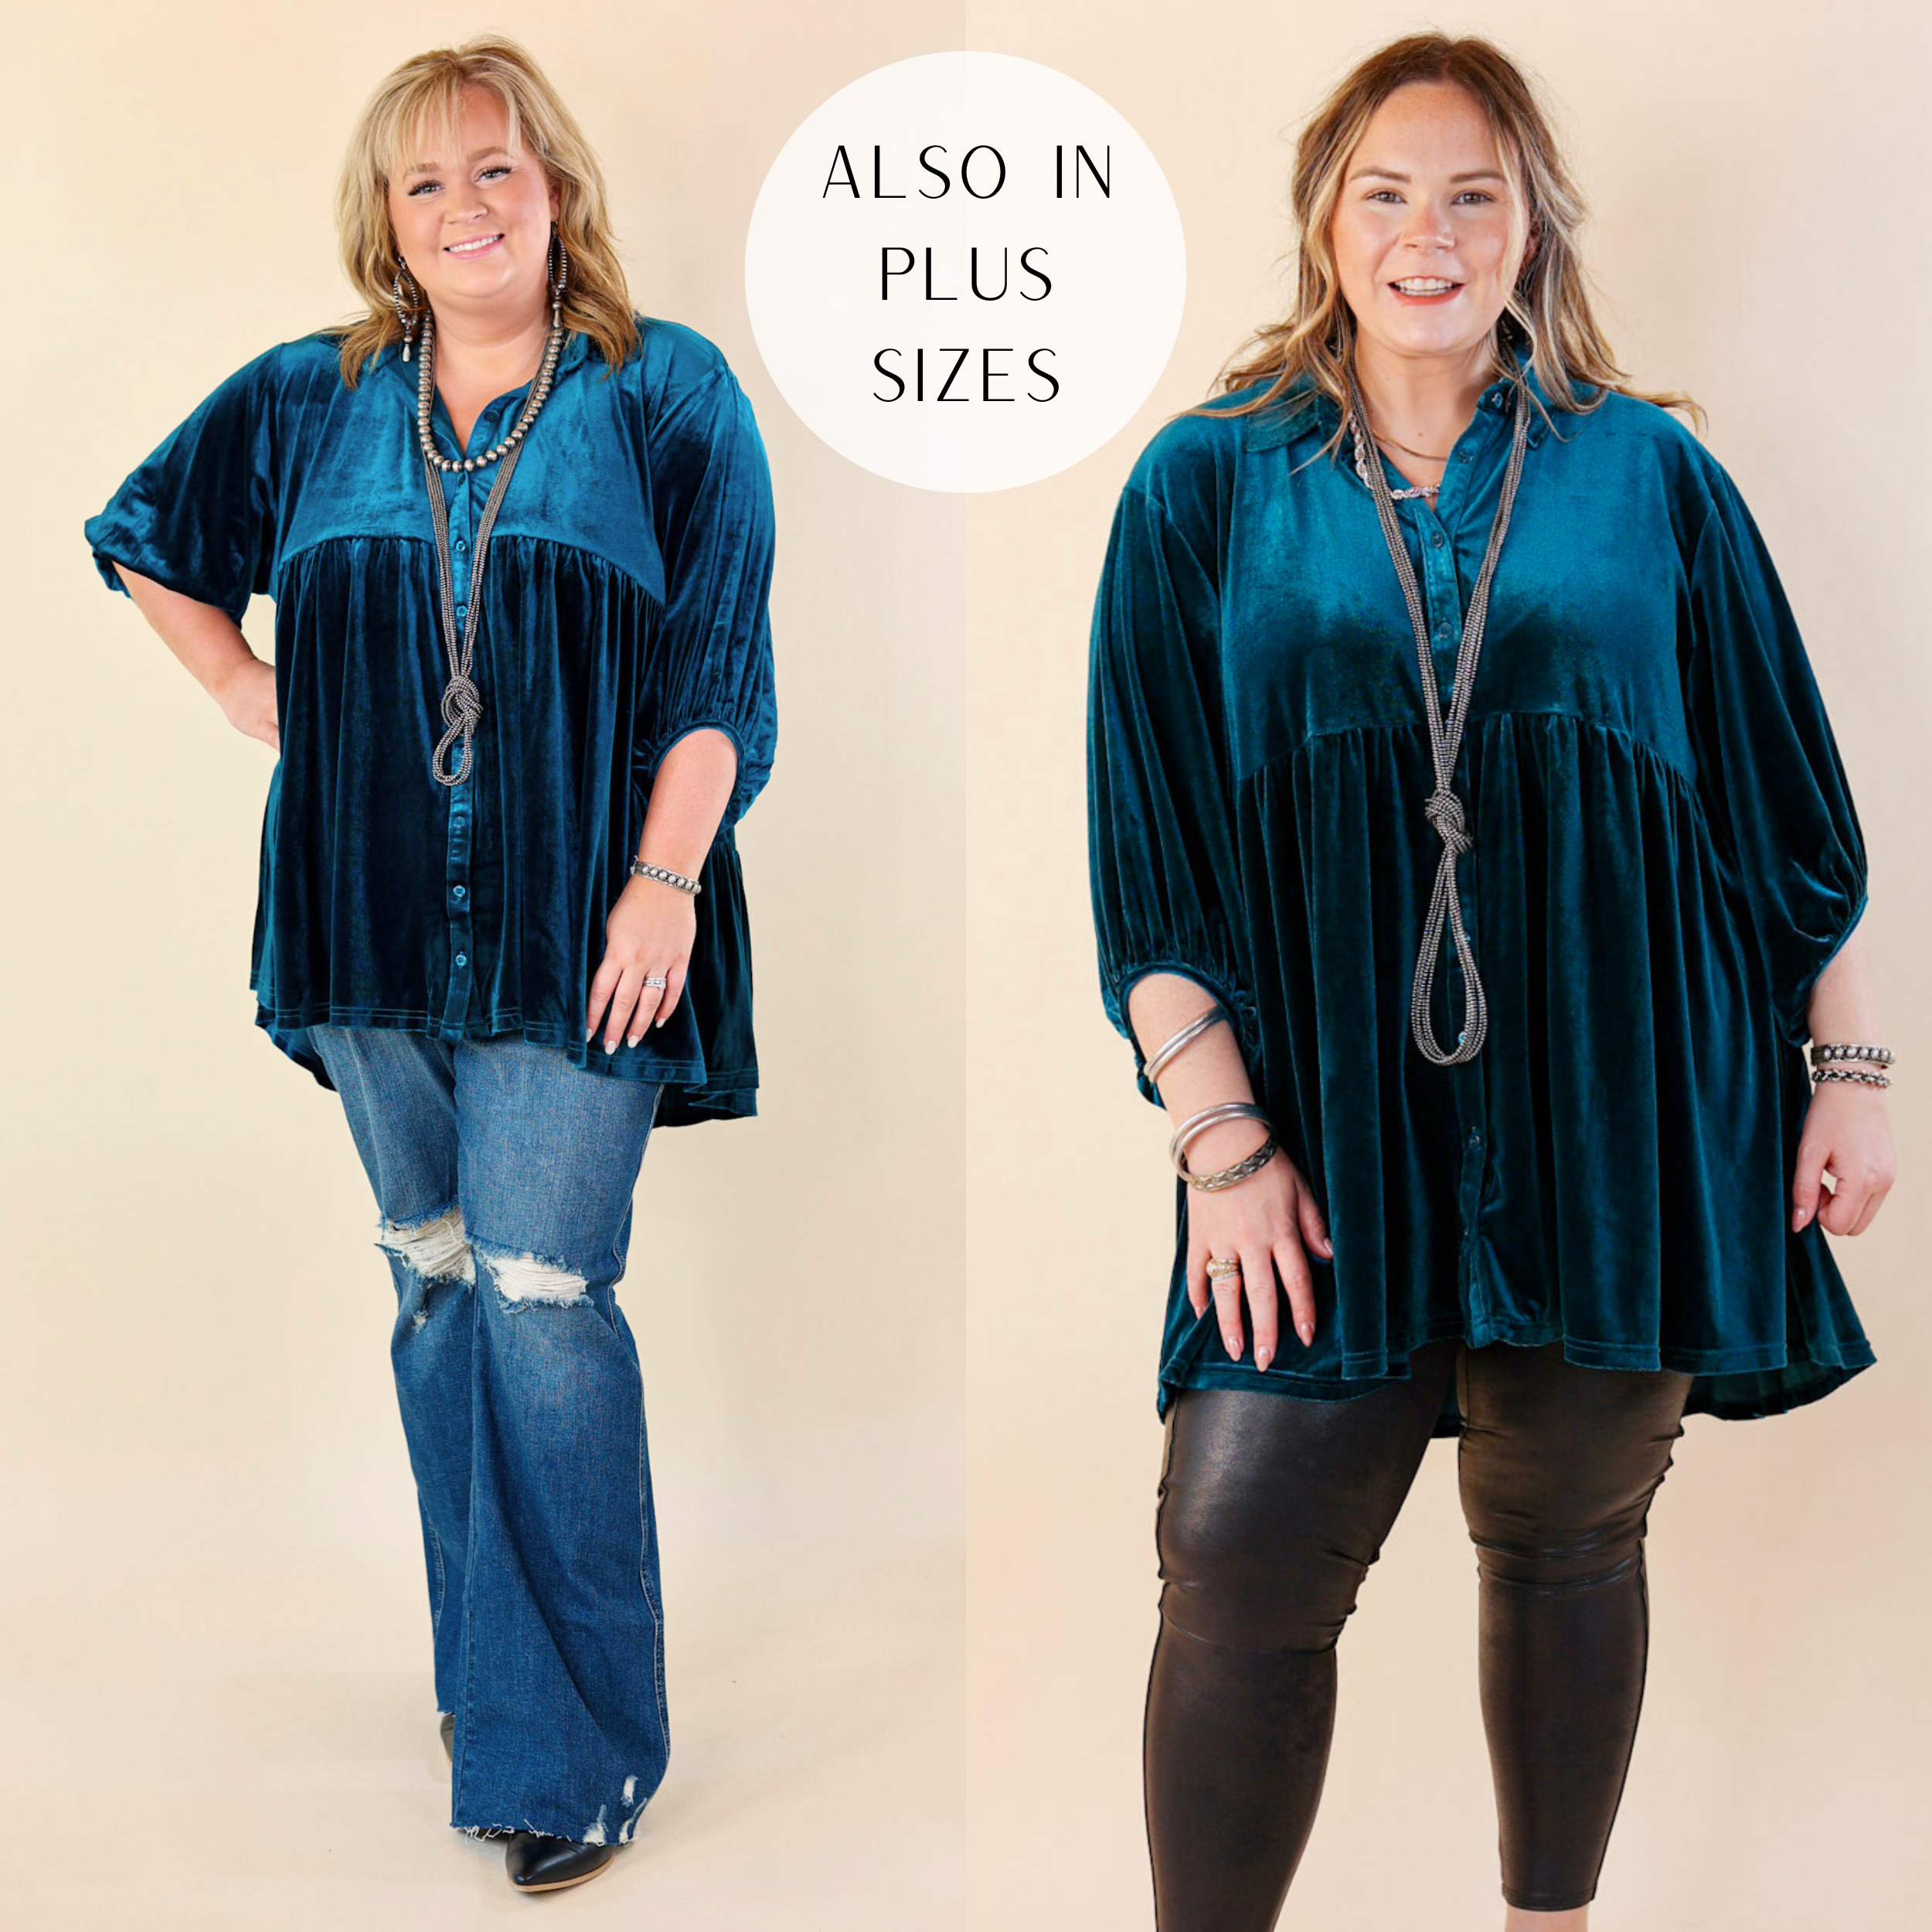 Models are wearing teal blue velvet blouse. Plus Size Model has the top paired with bootcut jeans and silver jewelry. Size large model has it paired with leather leggings and silver jewelry.